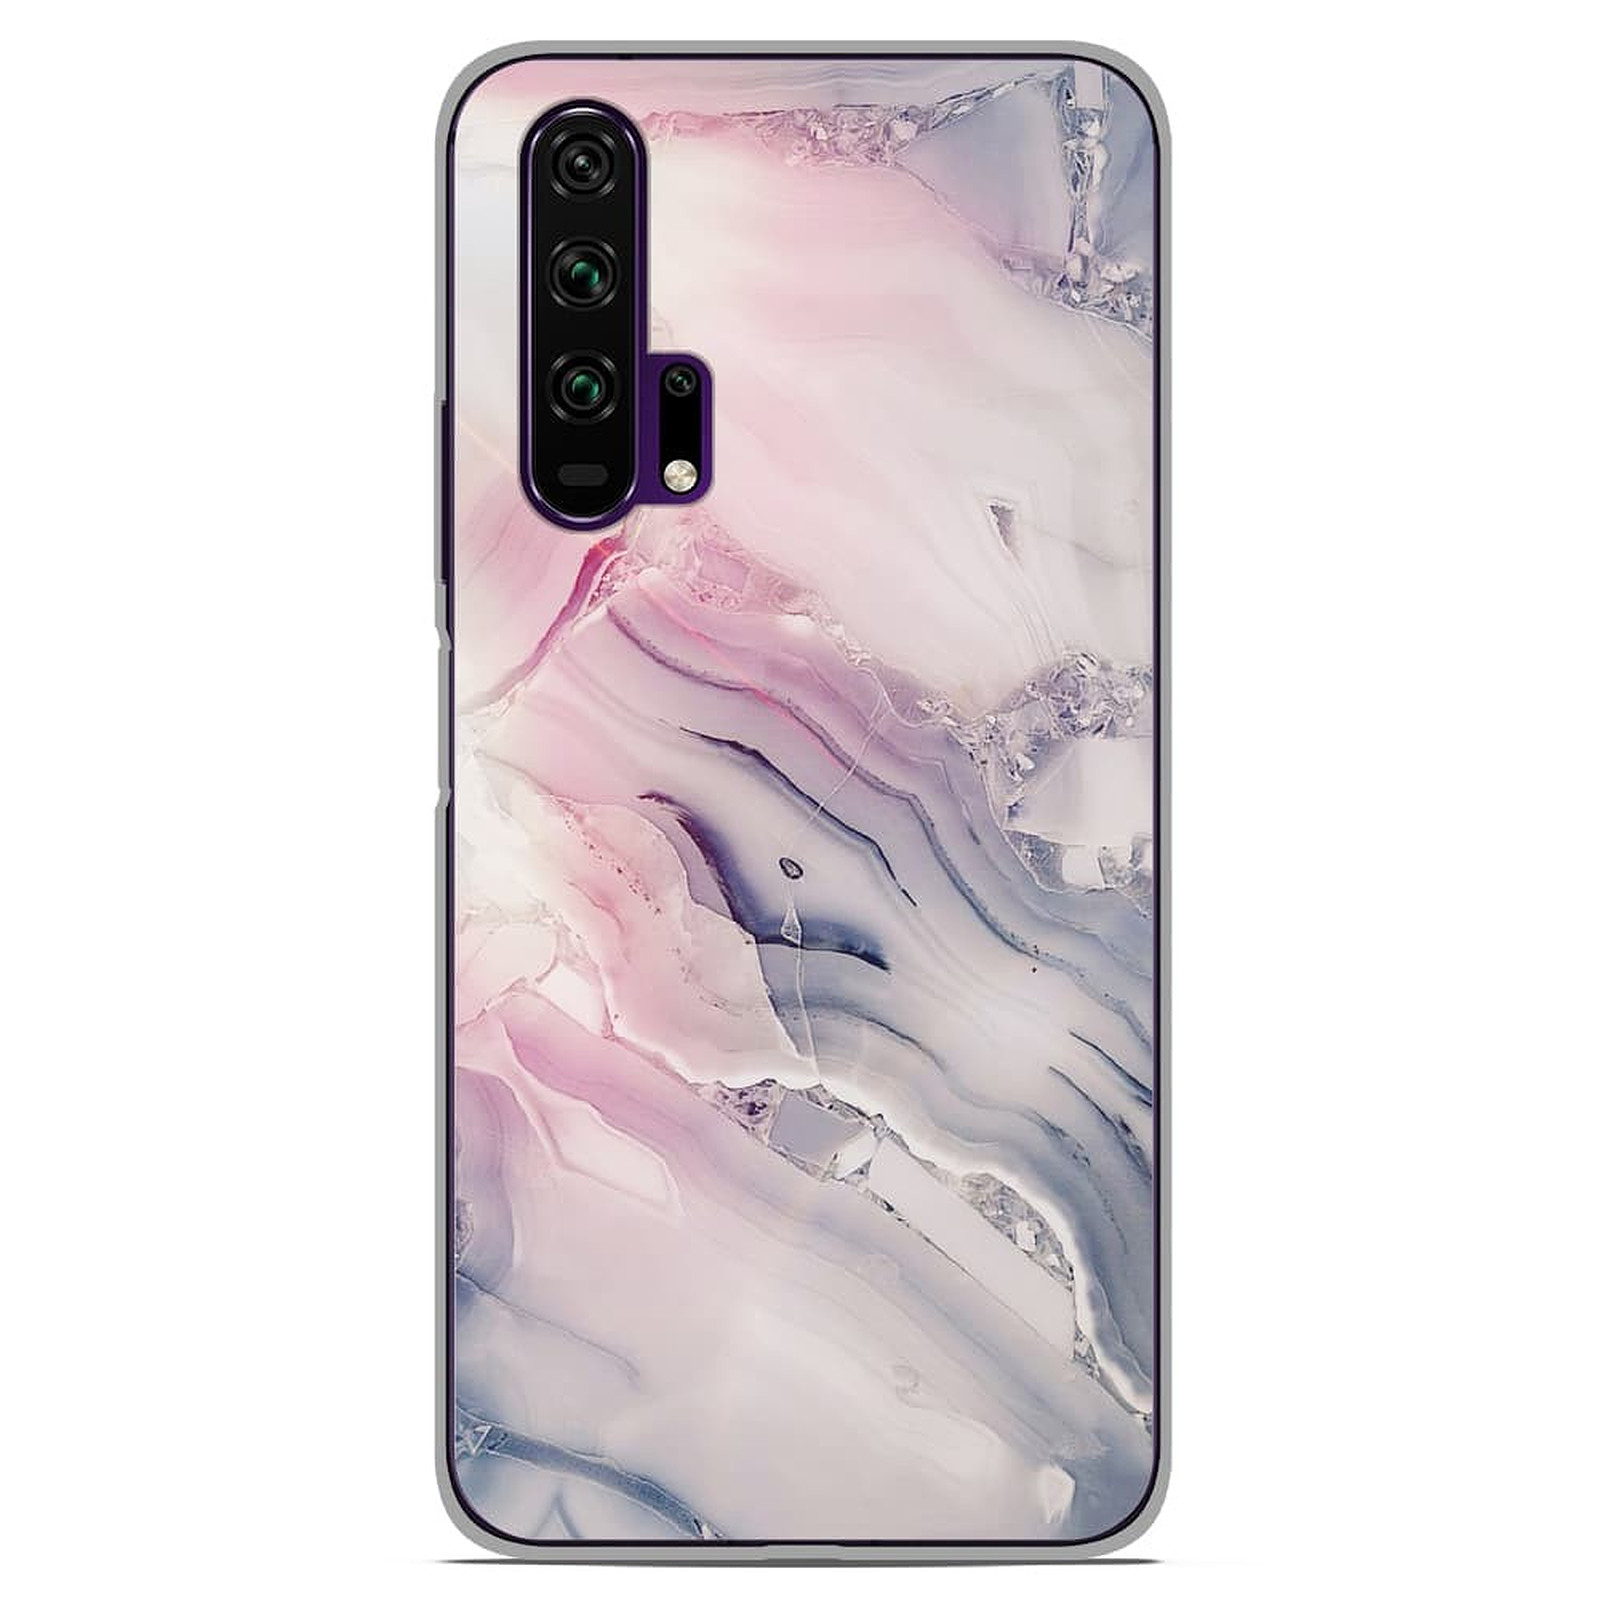 1001 Coques Coque silicone gel Huawei Honor 20 Pro motif Zoom sur Pierre Claire - Coque telephone 1001Coques